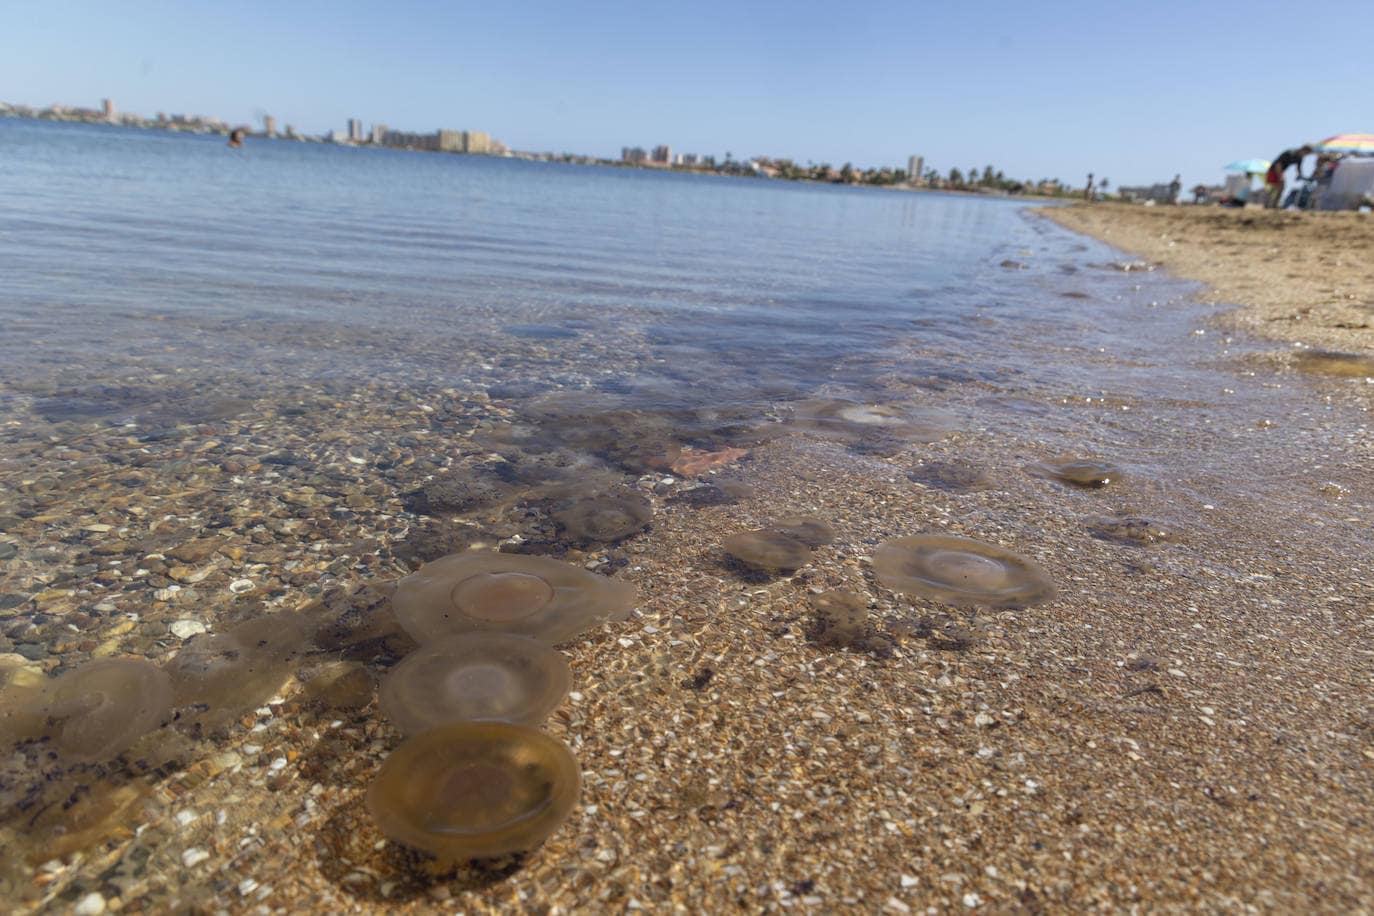 More jellyfish appear on the southern shore of the Mar Menor